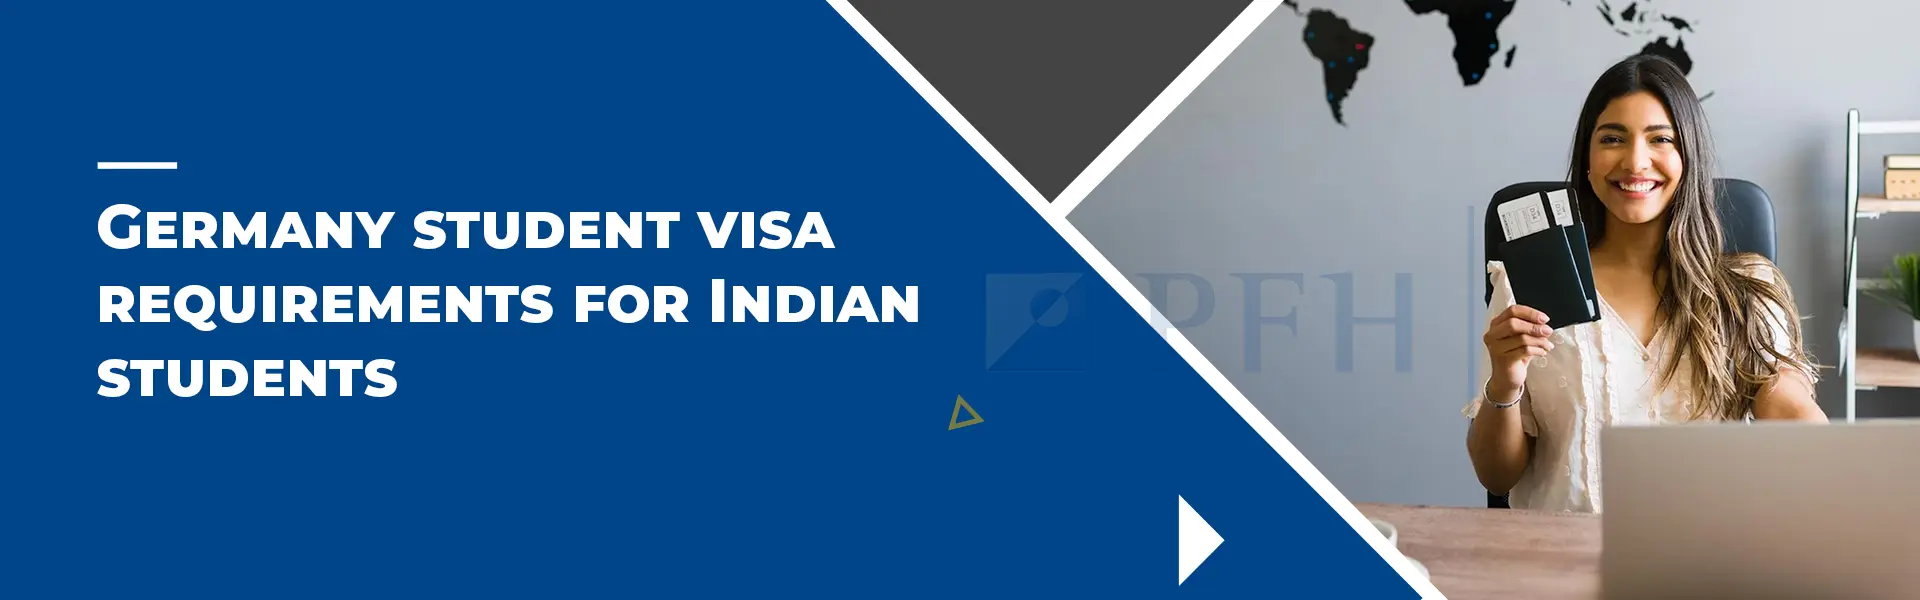 Germany Student Visa Requirements for Indian students